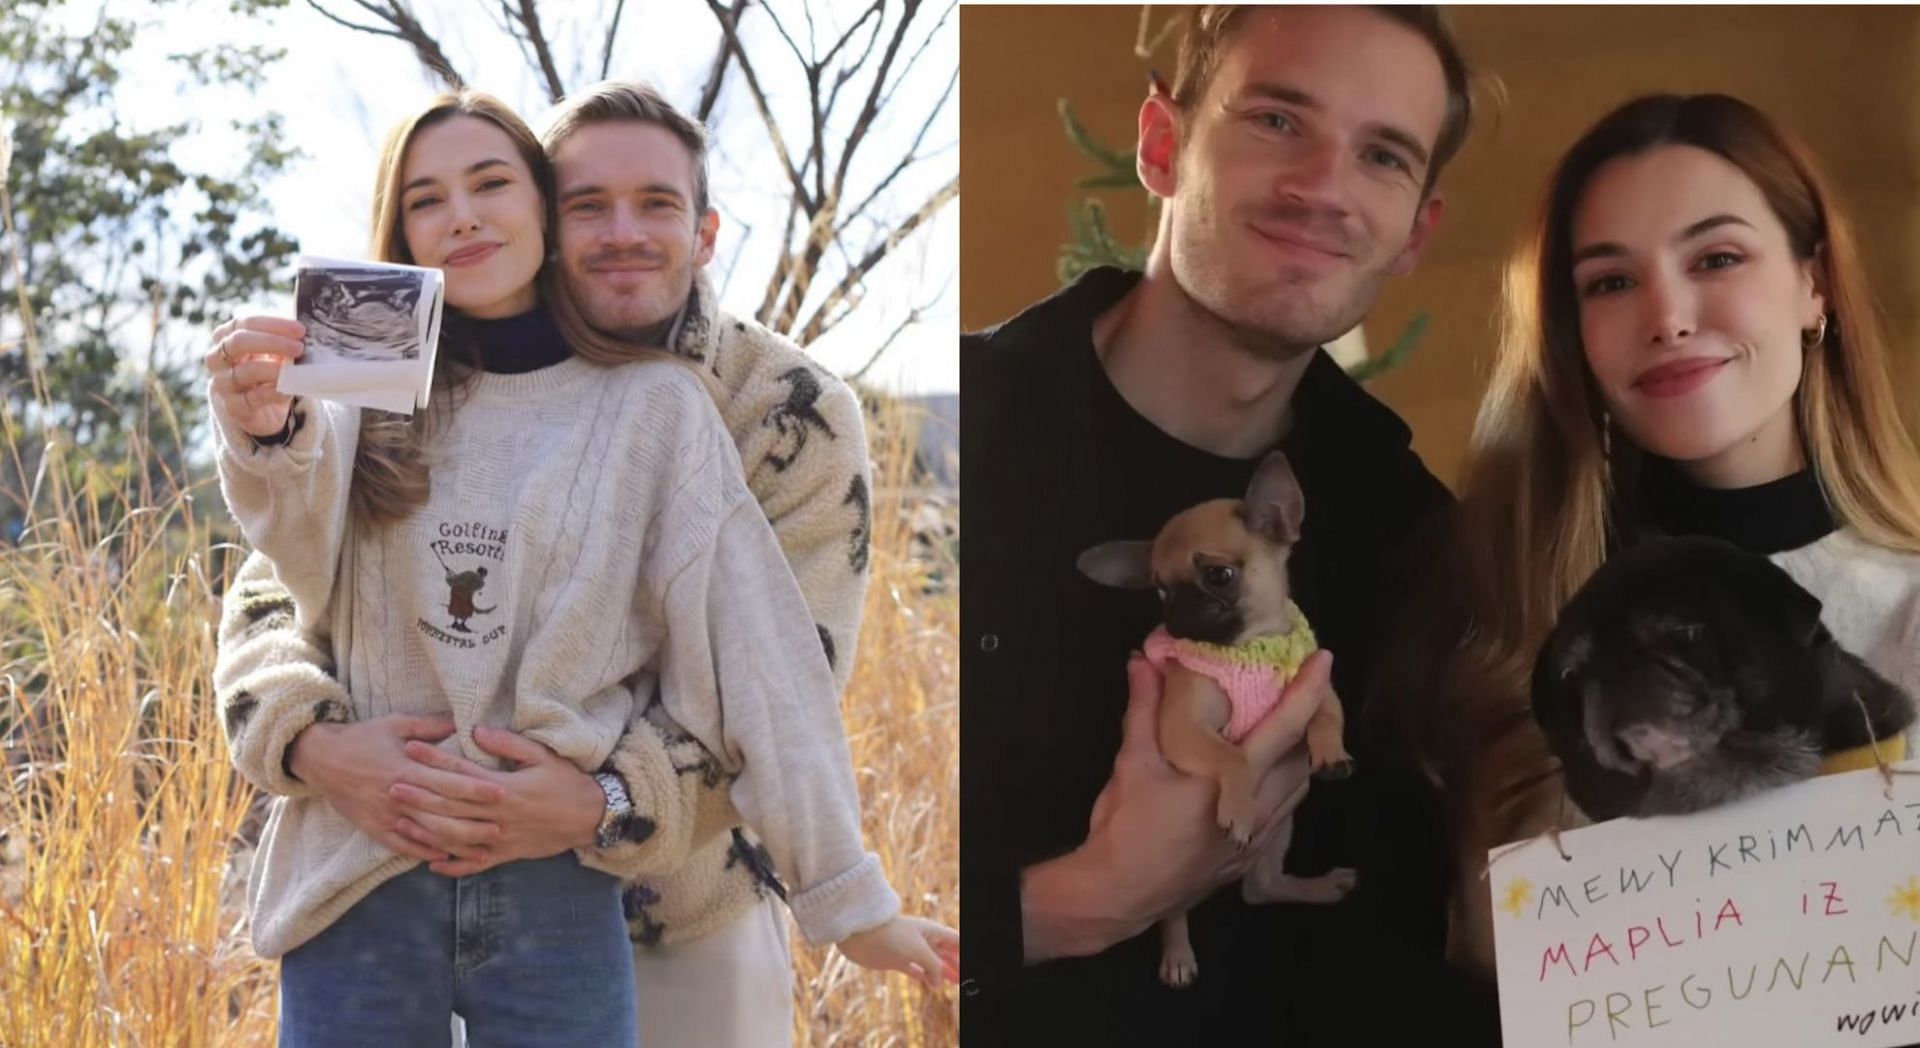 PewDiePie and his wife Marzia are expecting their first child together (Image via PewDiePie/YouTube)